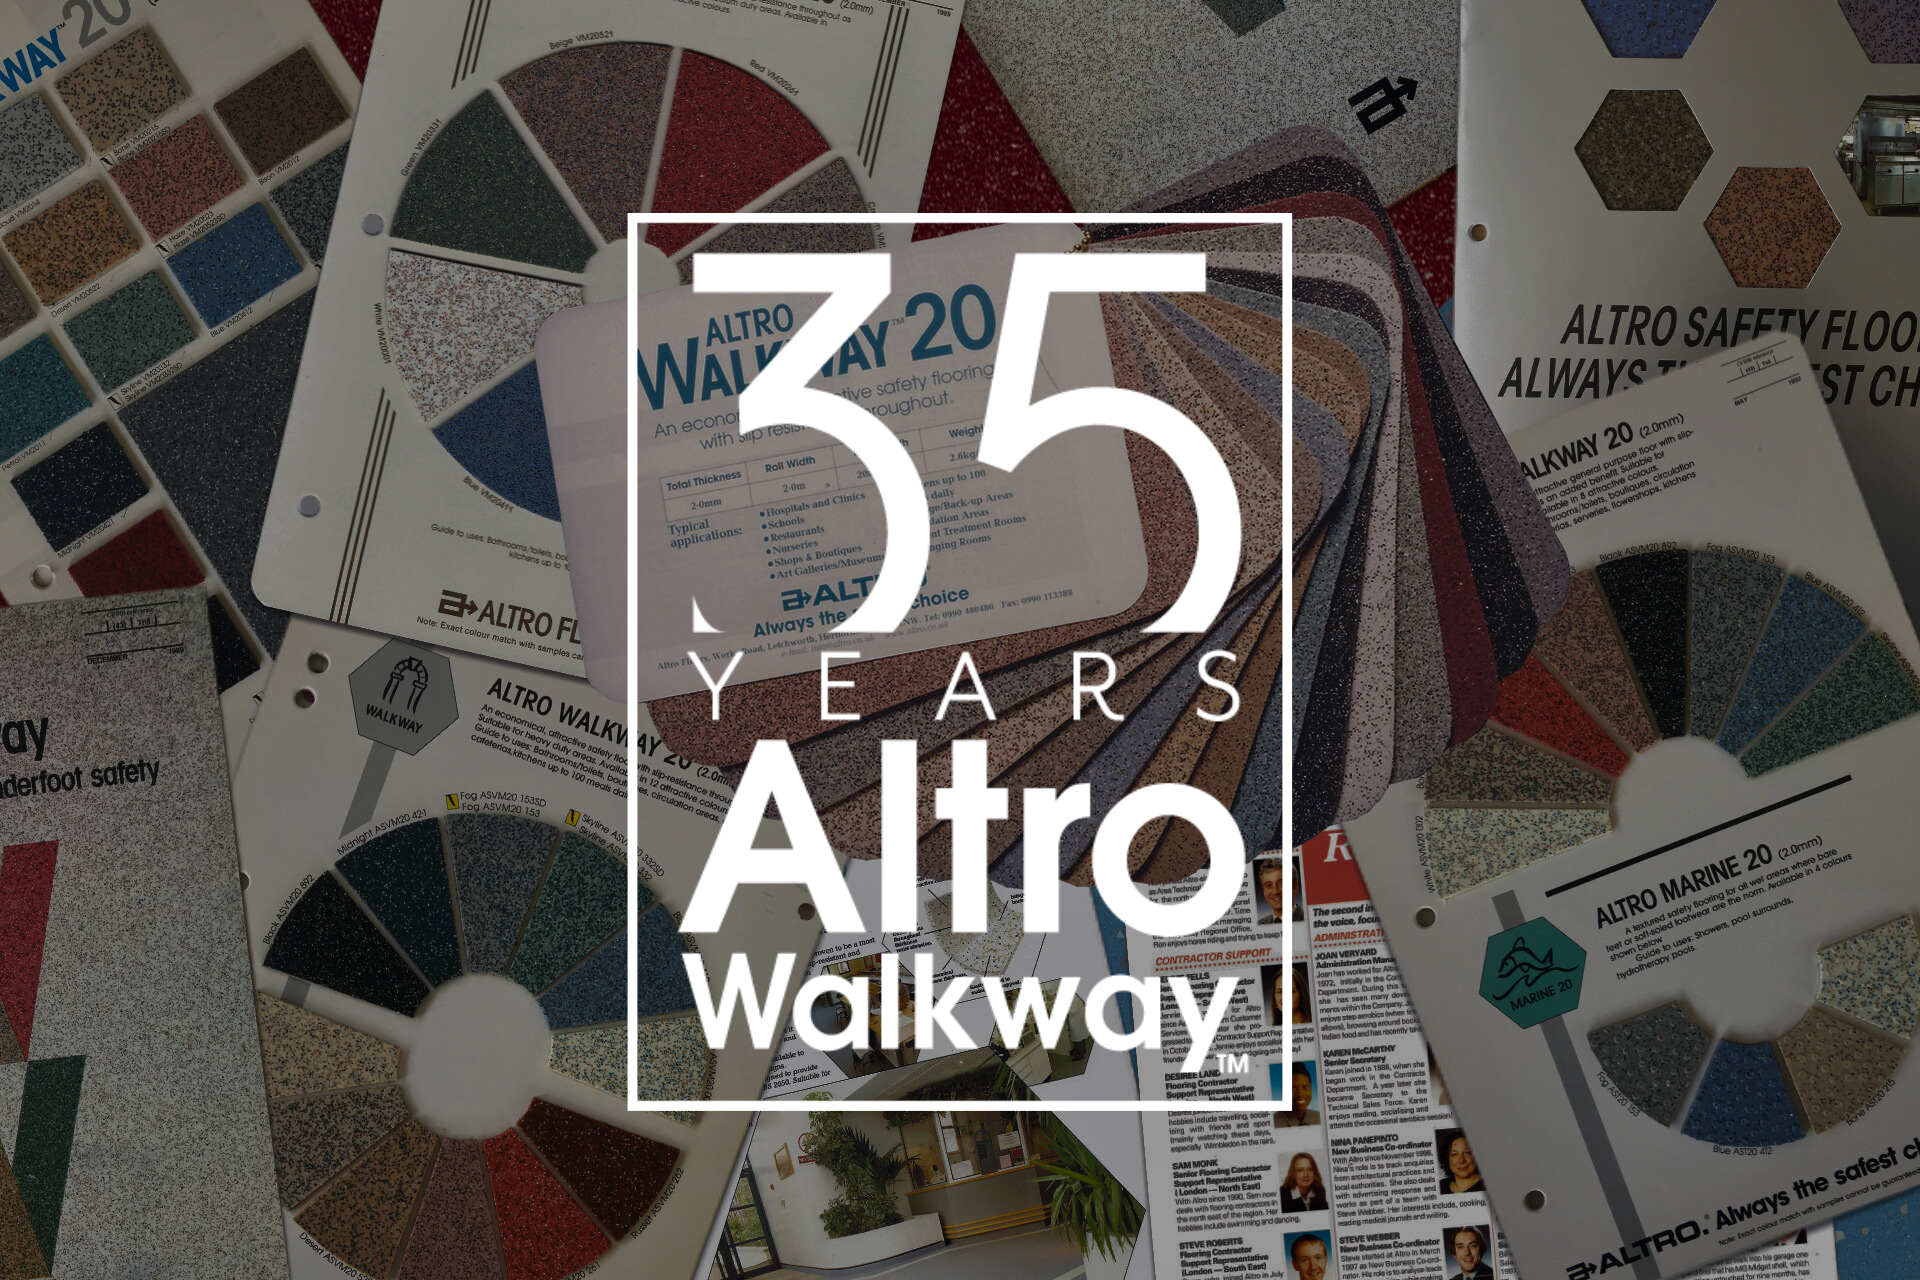 Altro Walkway 20: A legacy of safety!